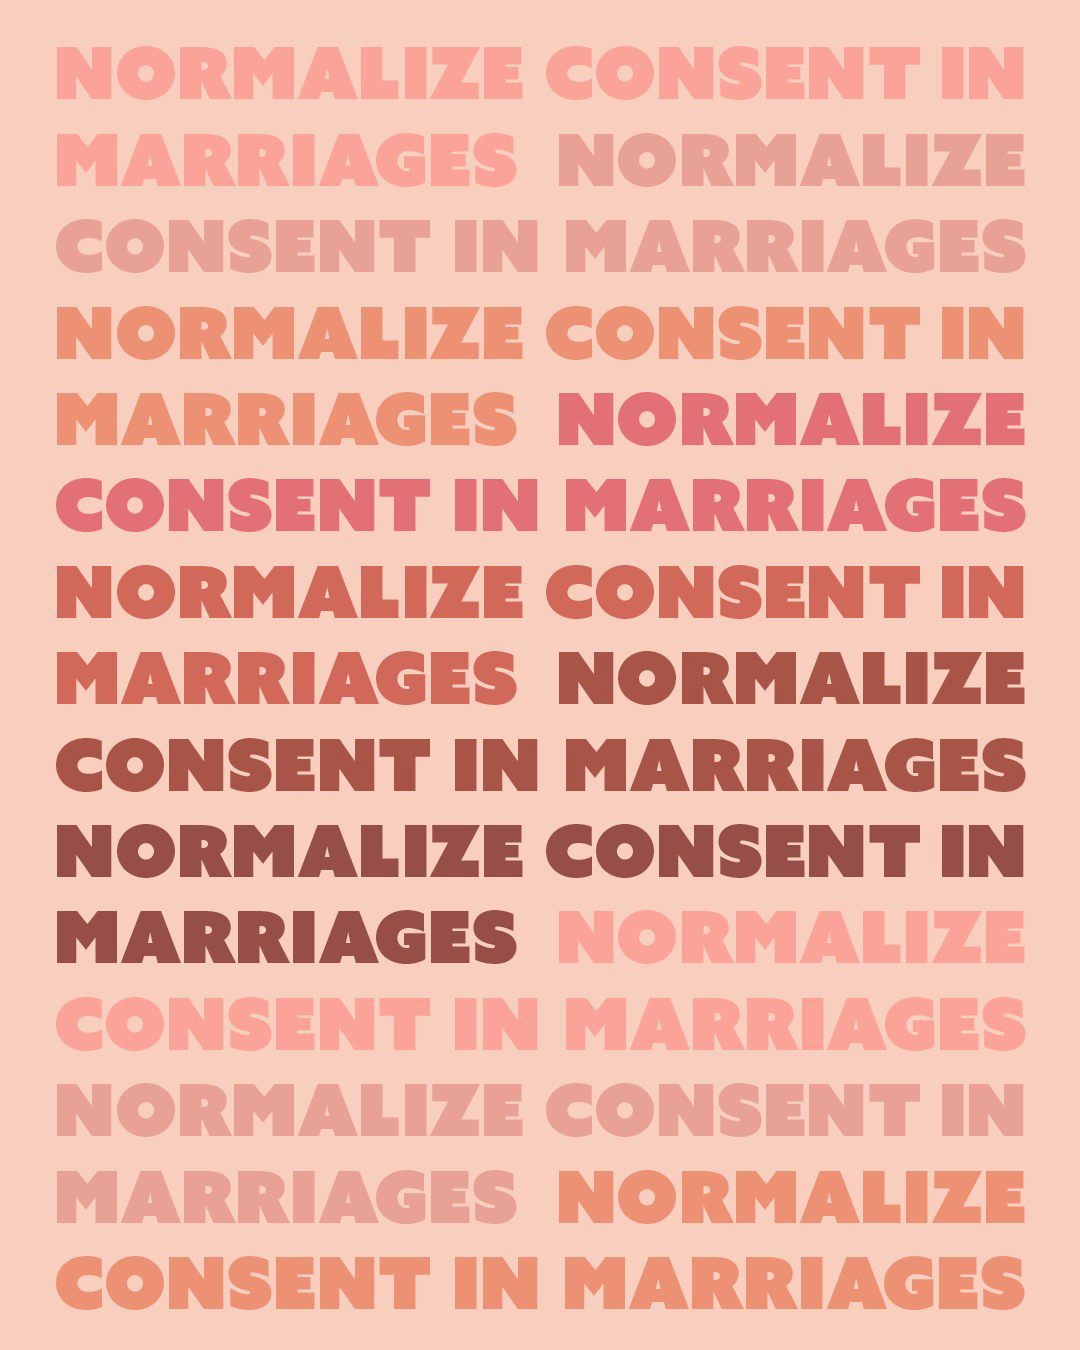 Normalize Consent by Smishdesigns